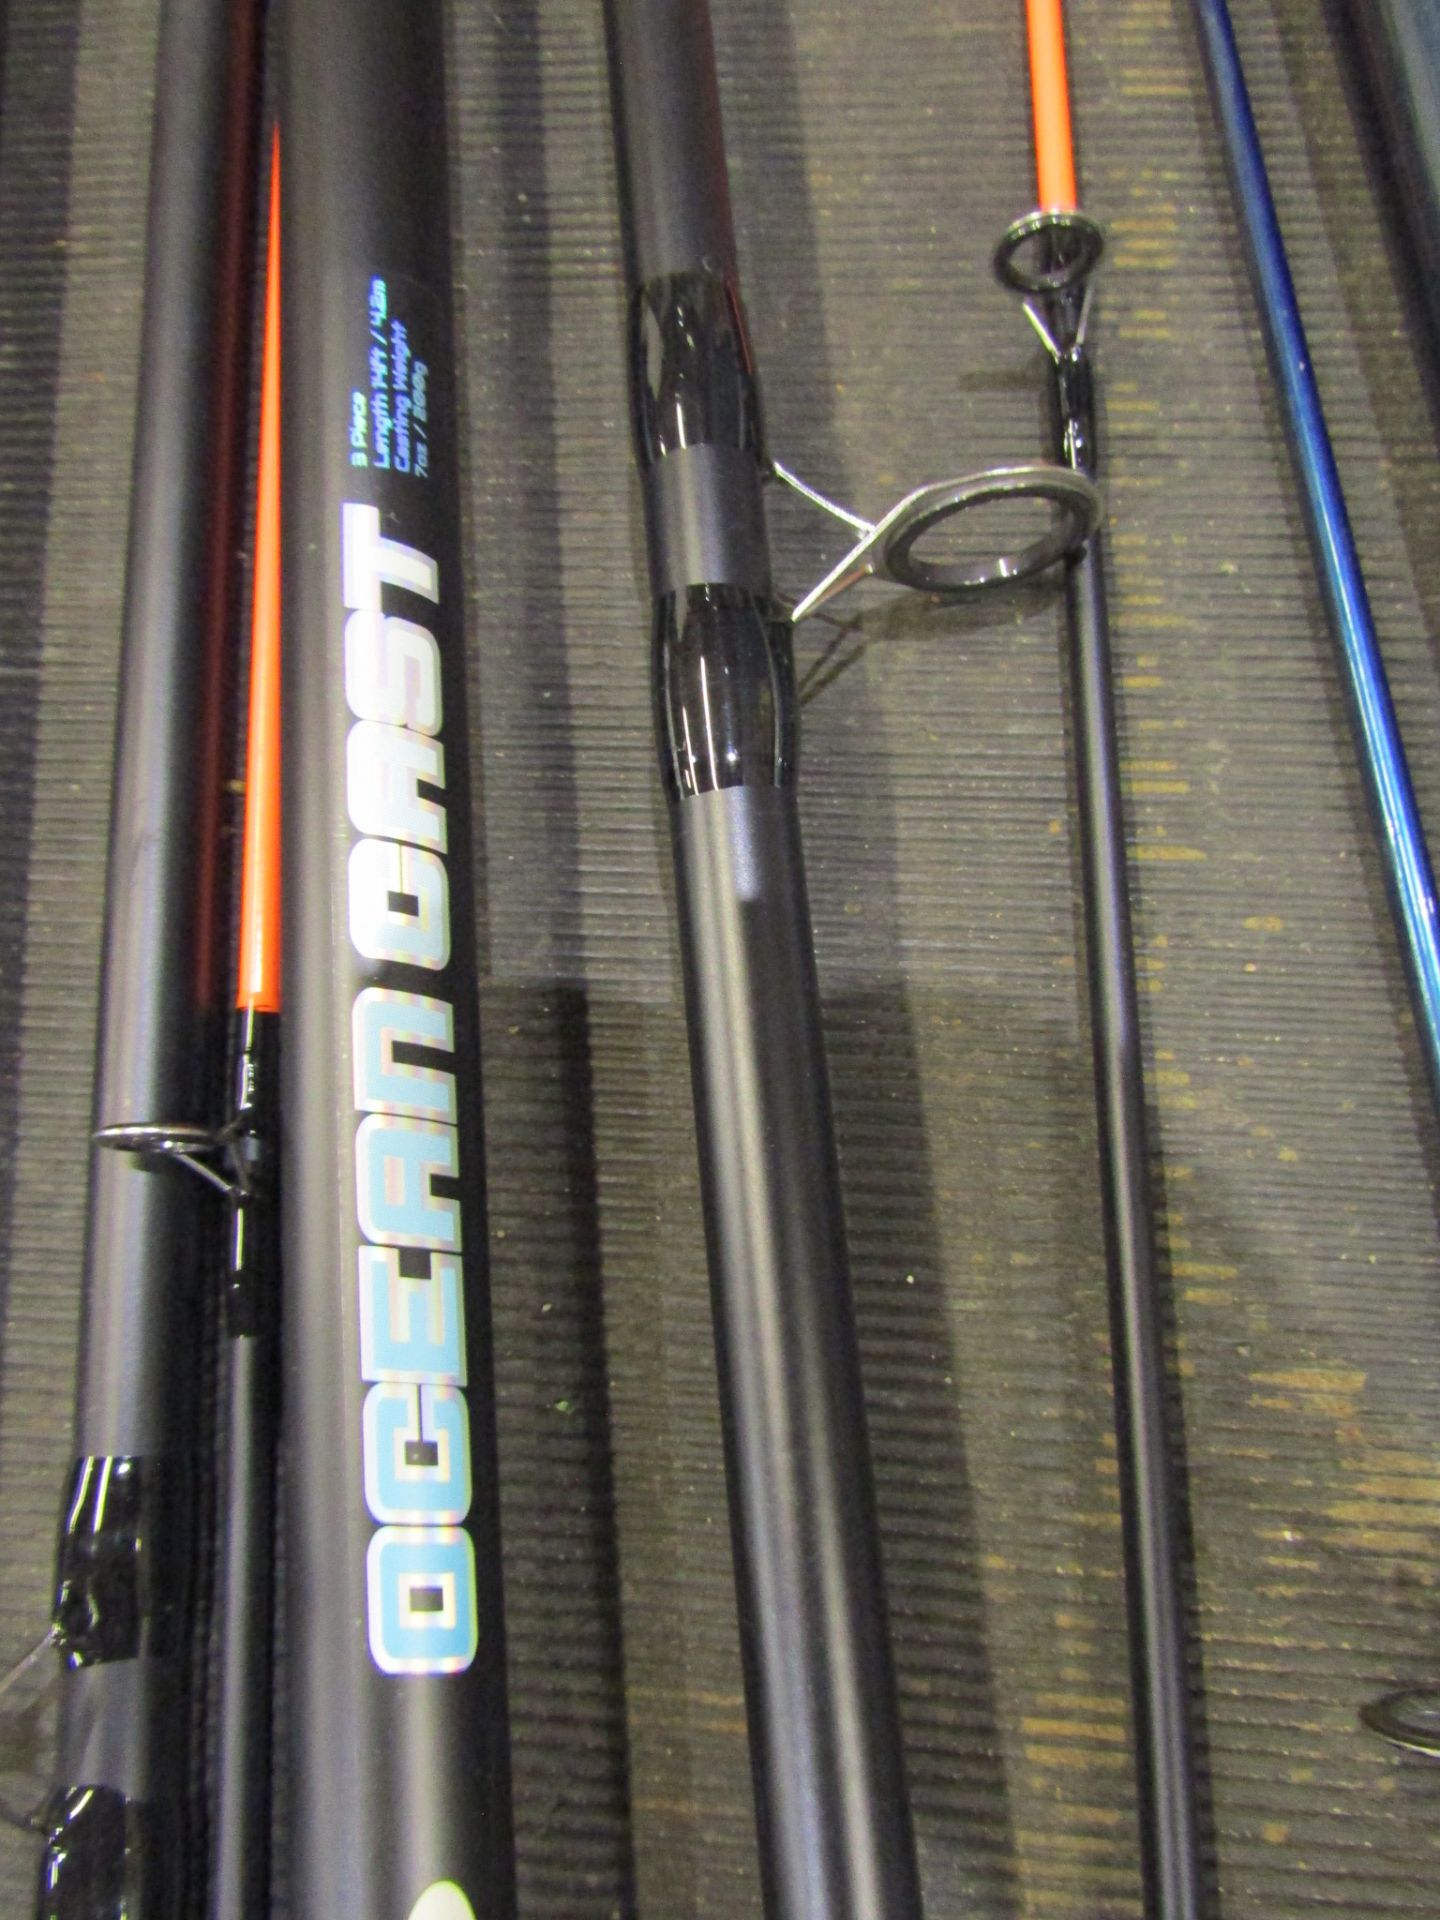 4 Sea fishing rods, 3 reels, a pole and box of tackle - Image 6 of 18